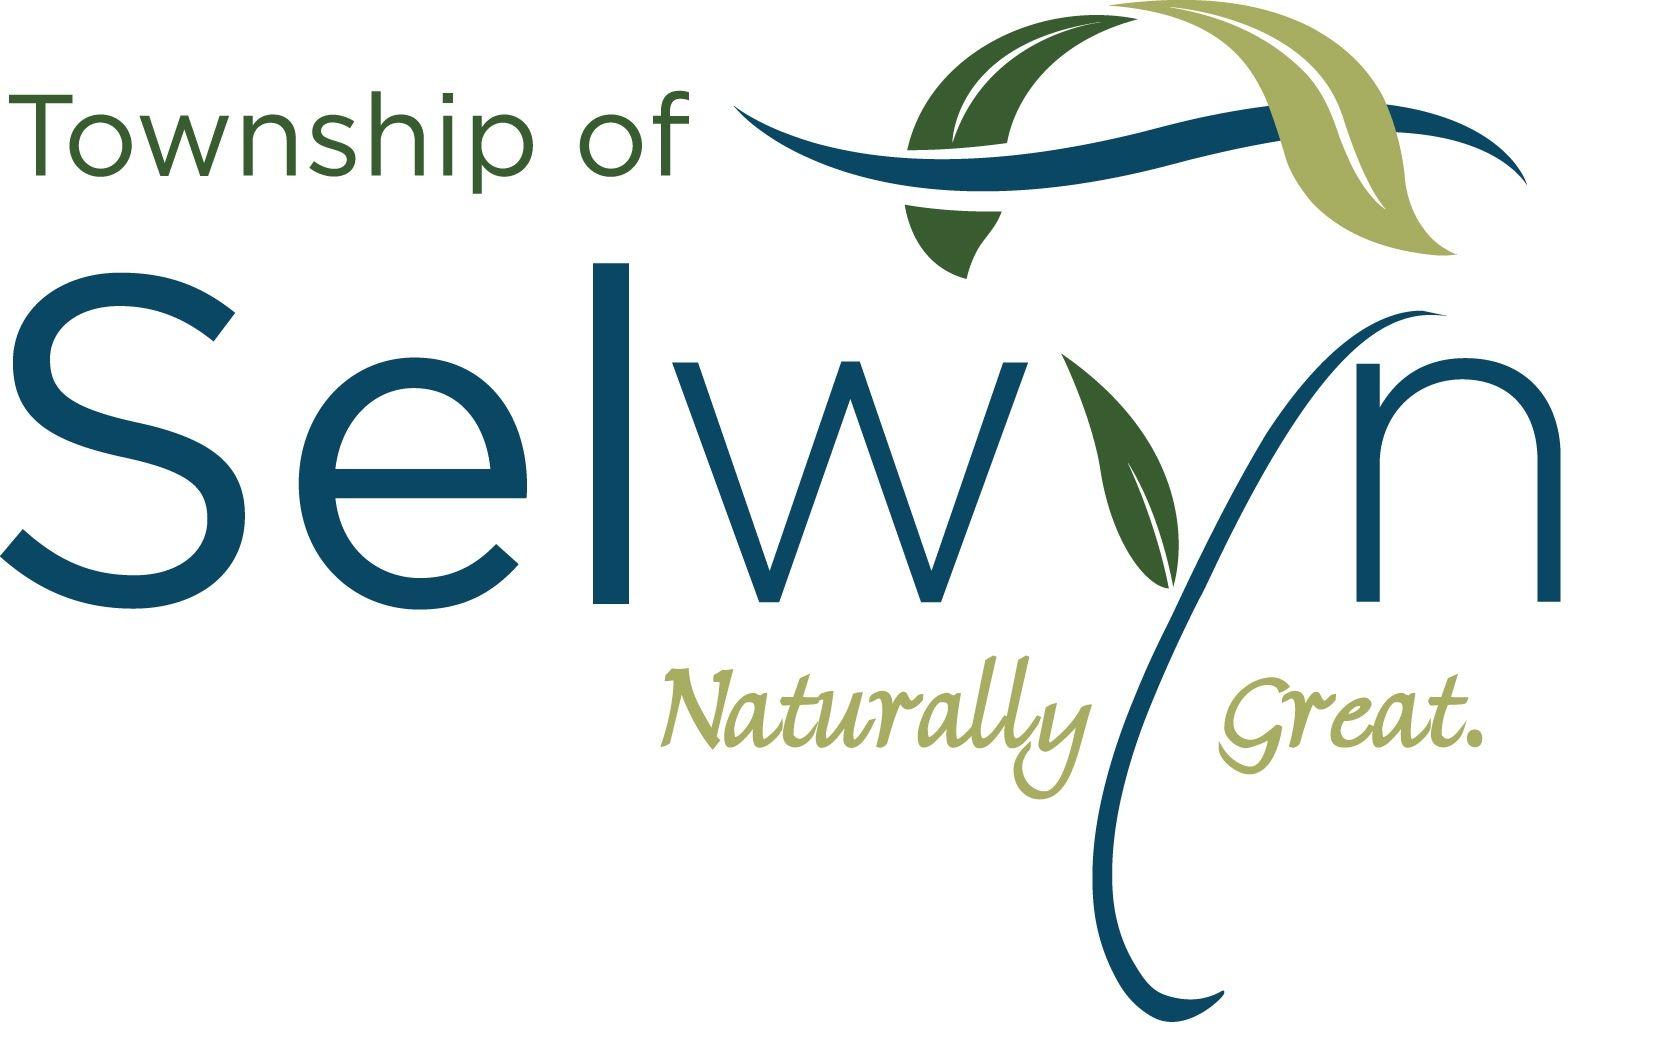 Township Logo - Discover Our Township - Selwyn